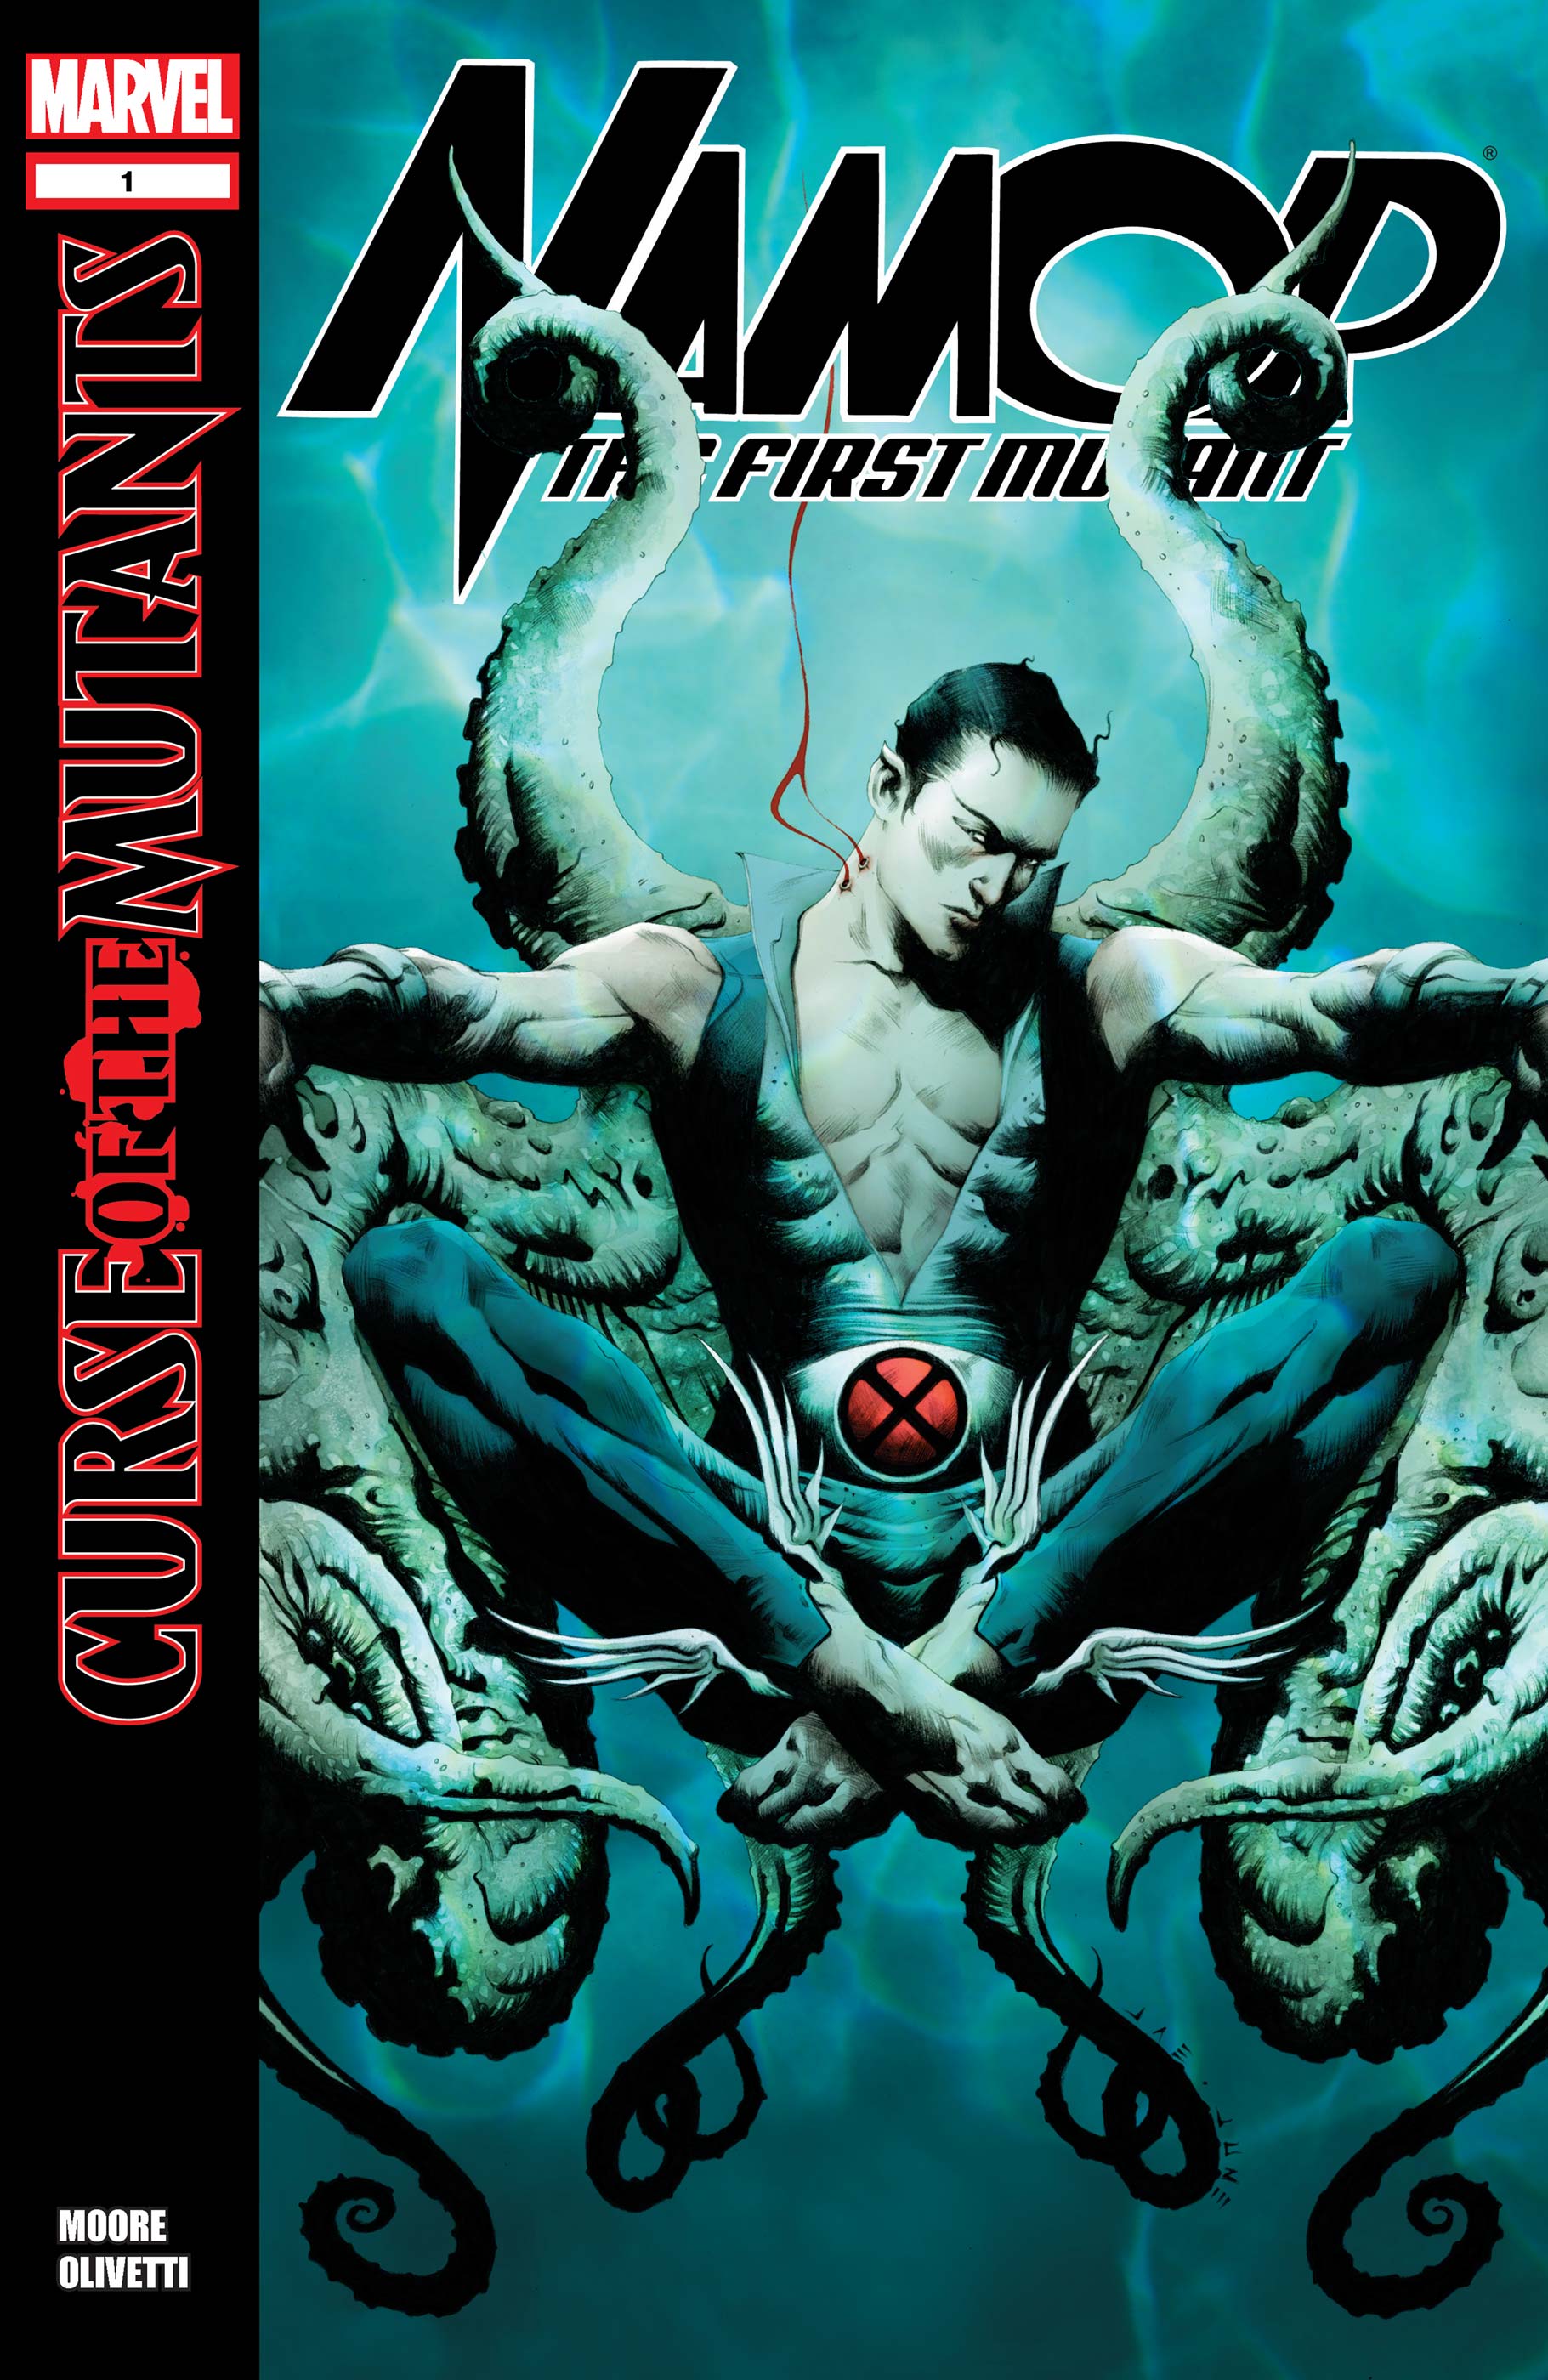 Namor: The First Mutant (2010) #1